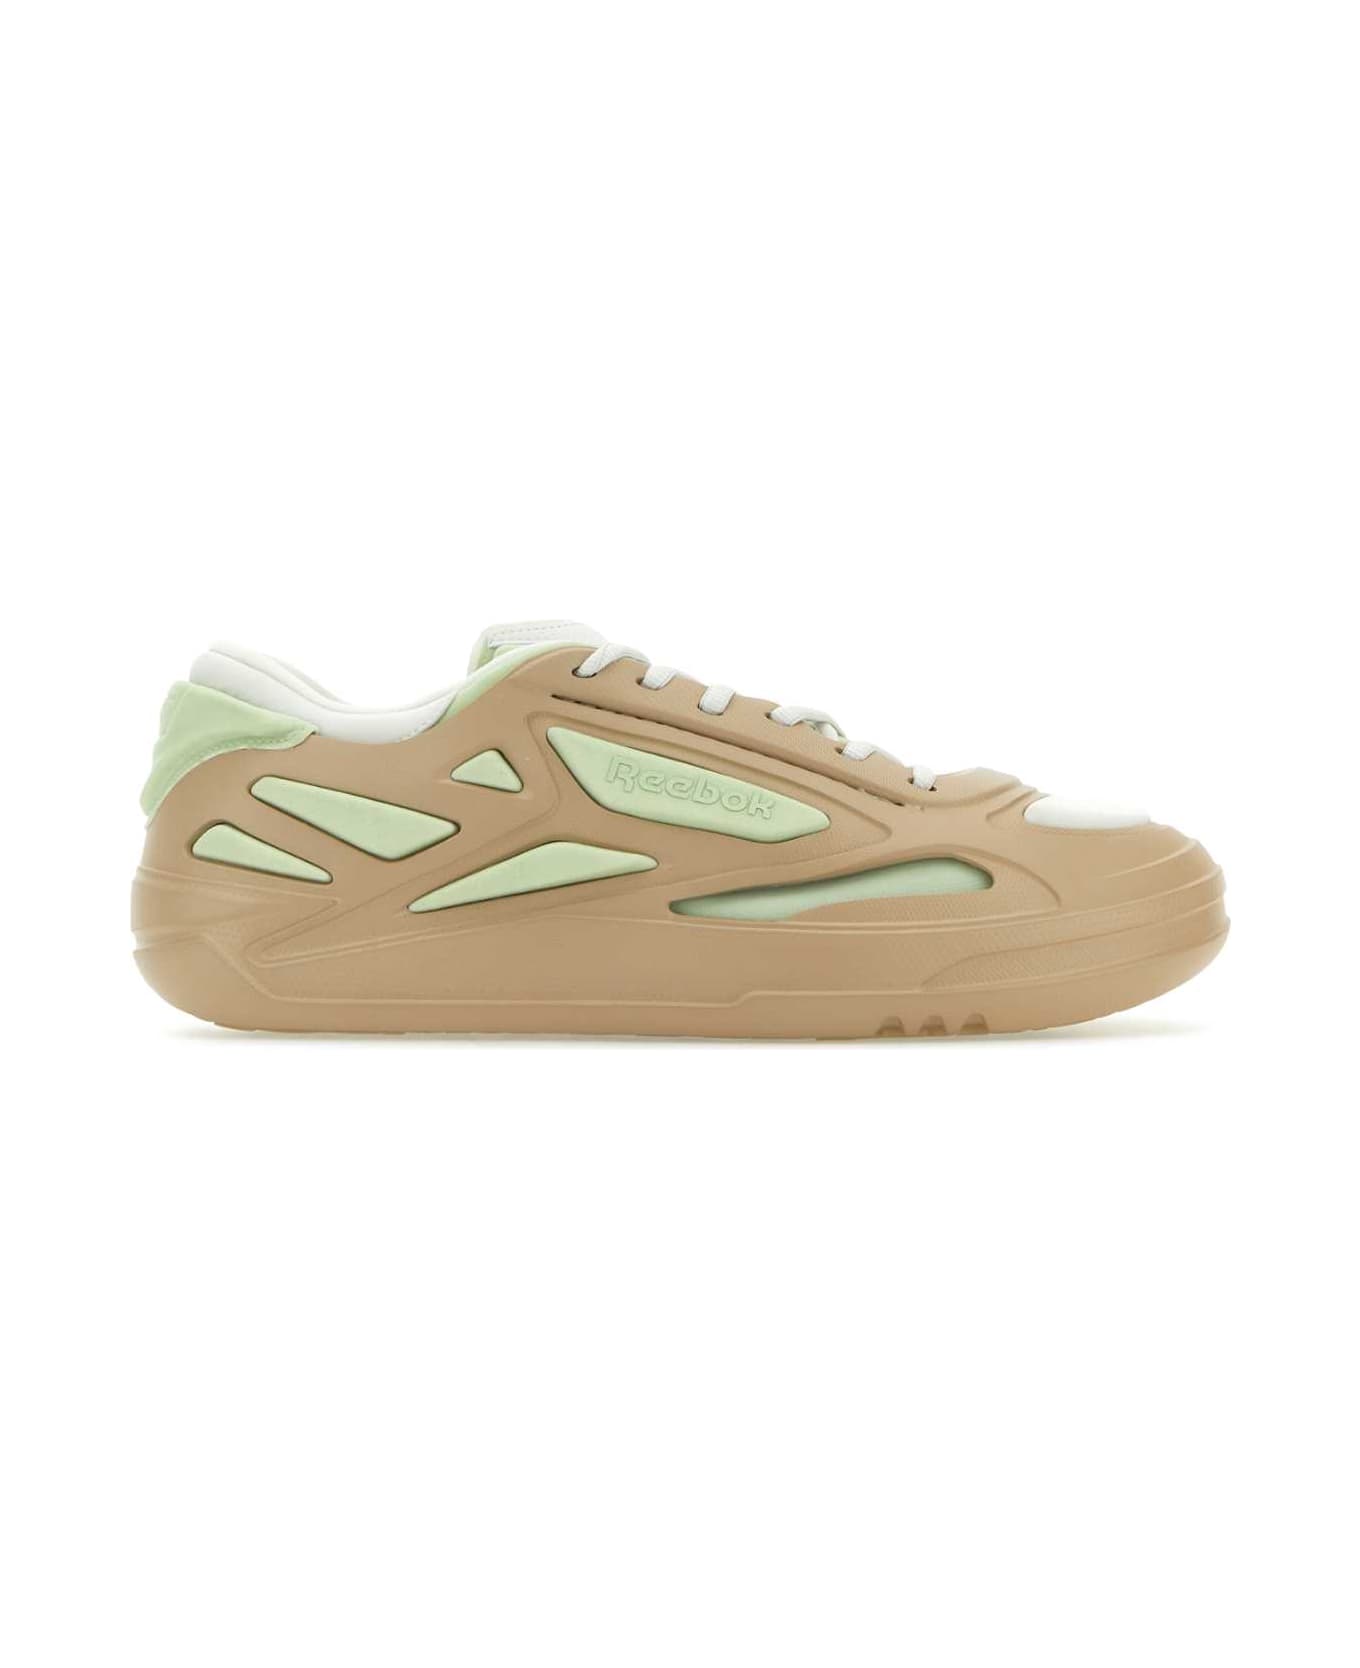 Reebok Multicolor Fabric And Rubber Future Club C Sneakers - BEIGELIG スニーカー